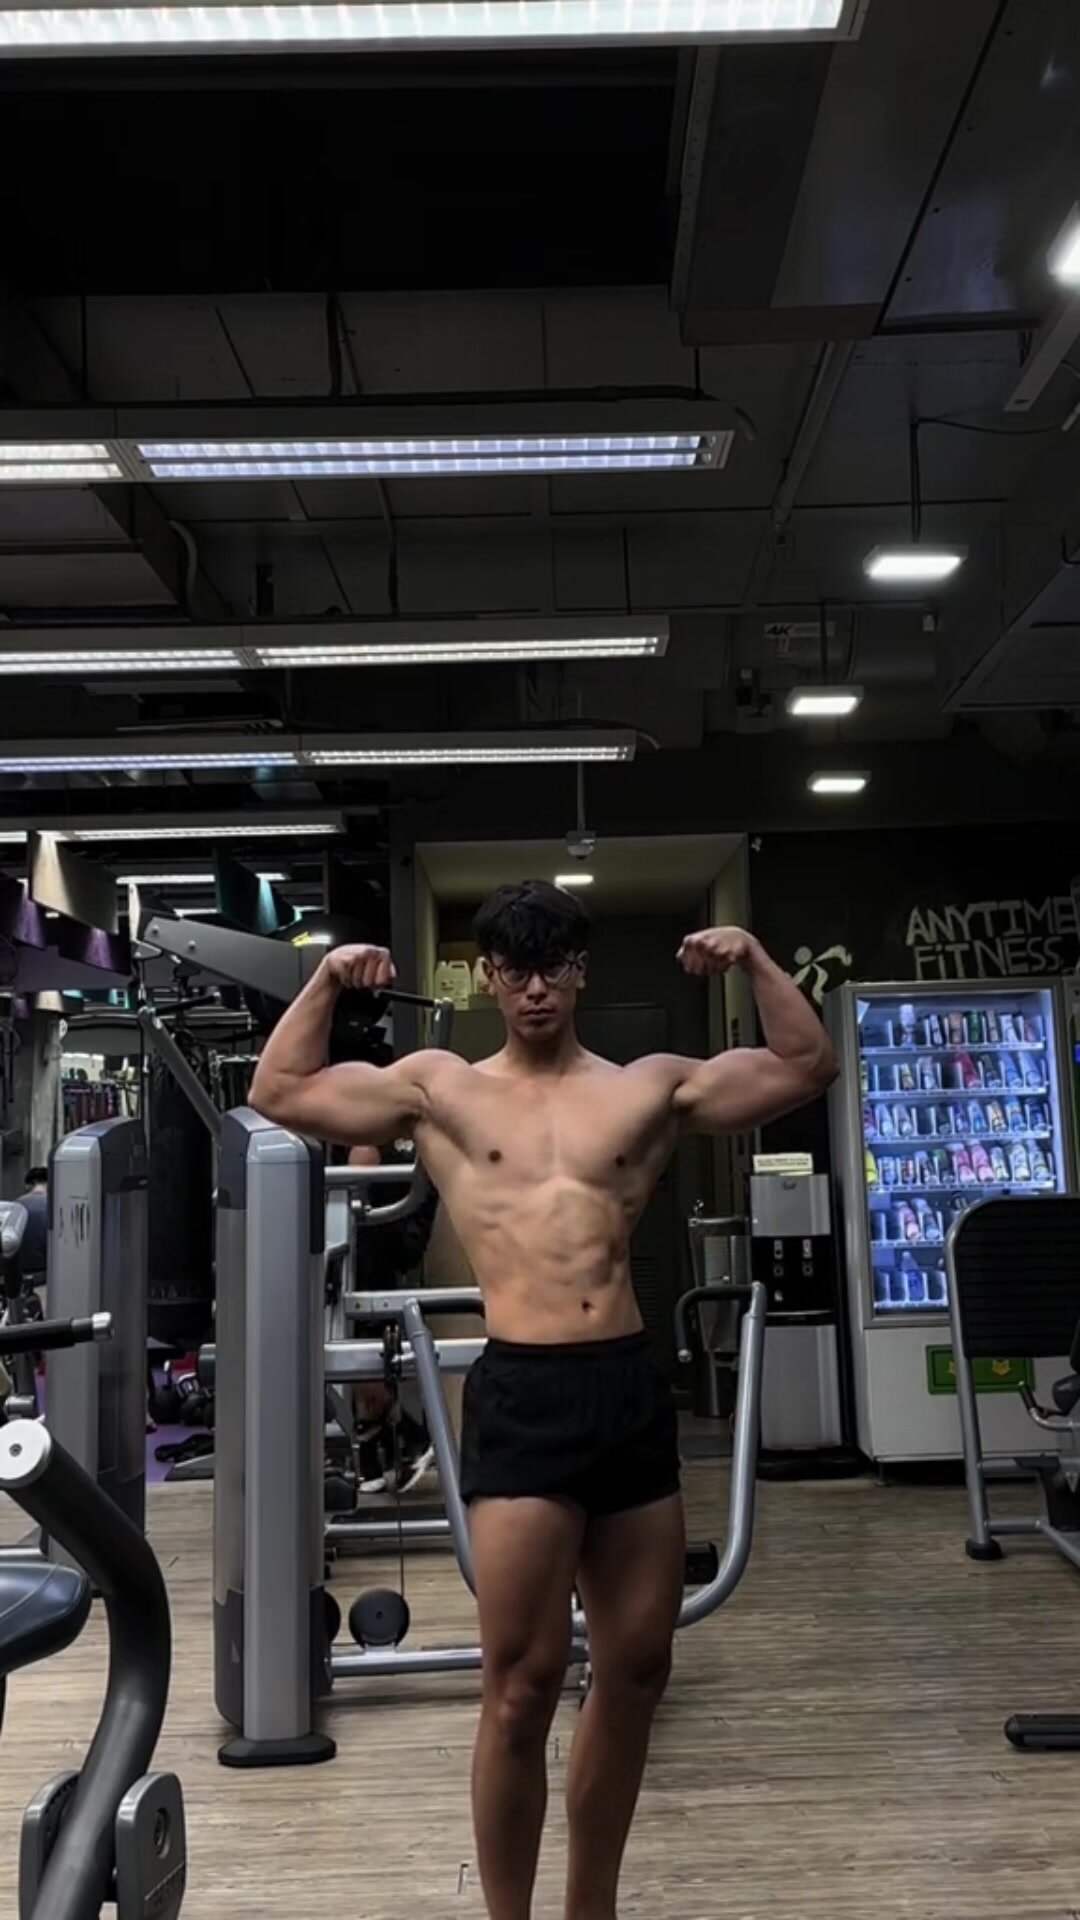 HOT SG CHINESE GUY FLEXING 10